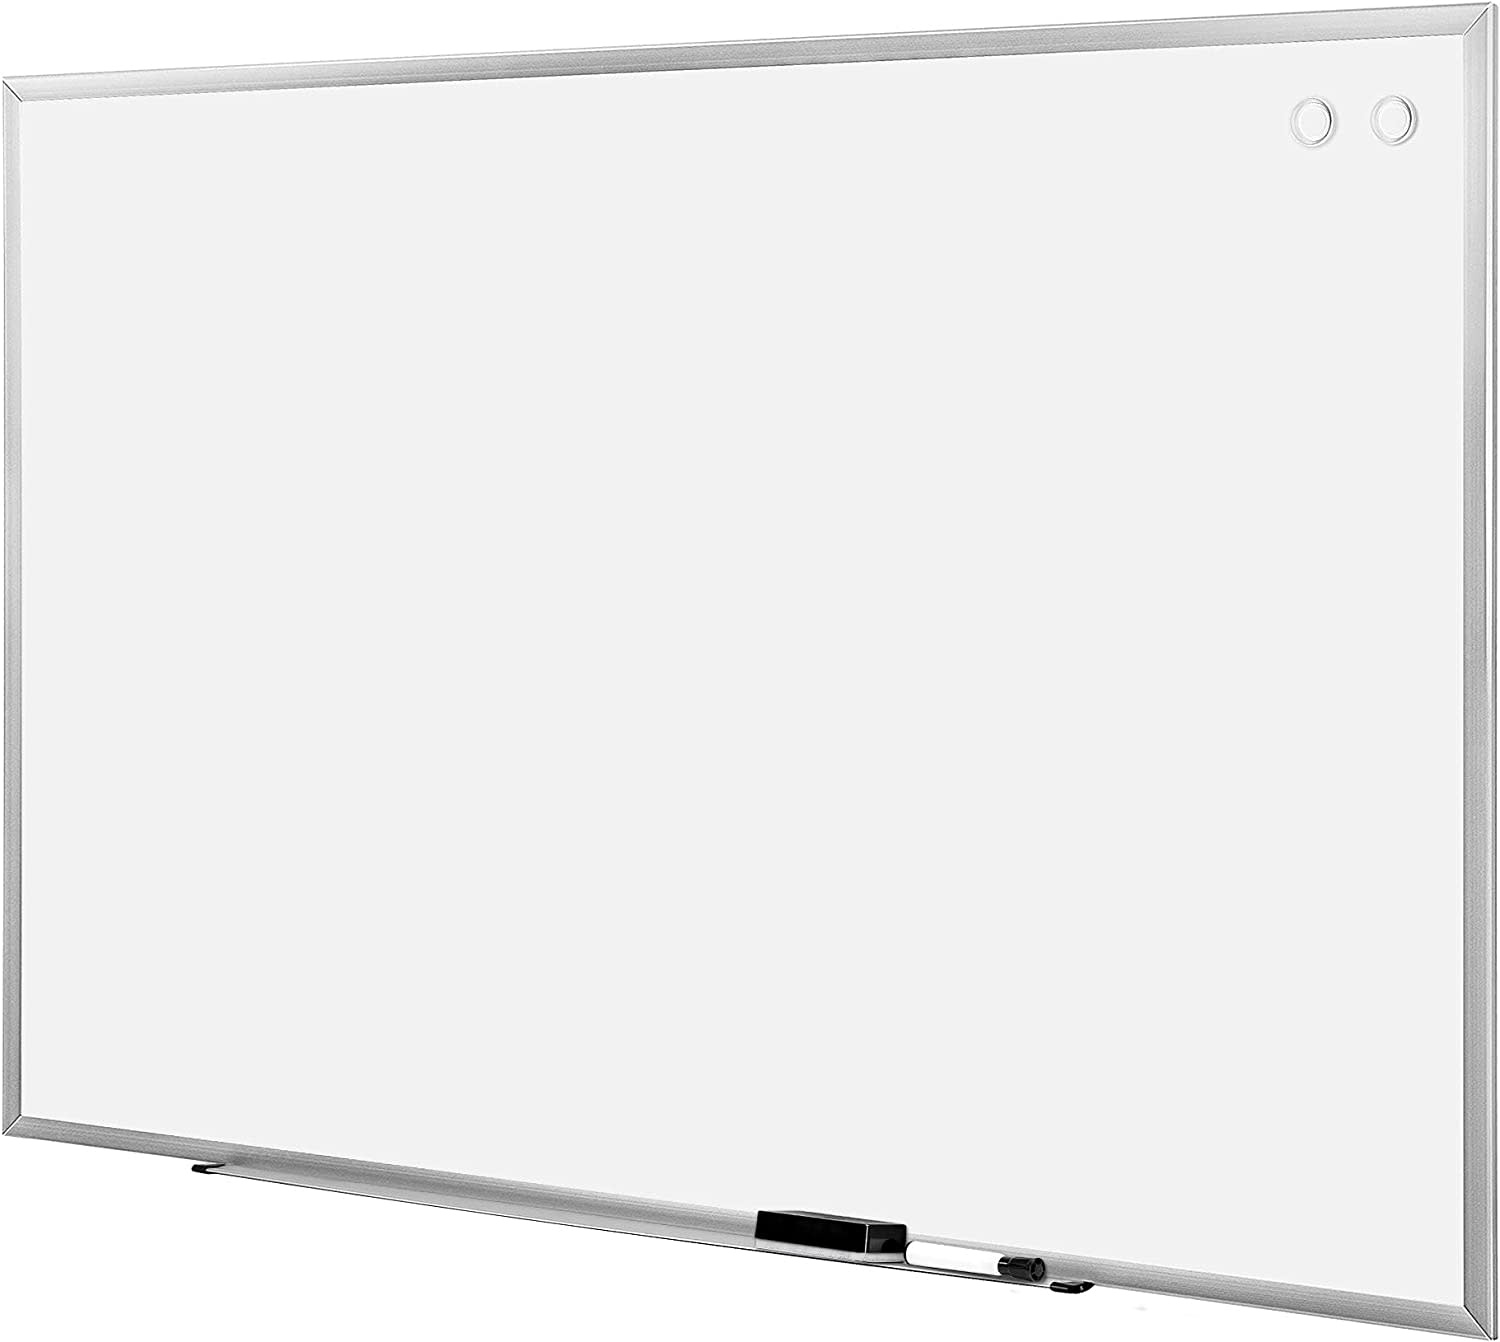 VIZ-PRO Dry Erase Board/Whiteboard, Non-Magnetic, 60 L x 48 W, Wall Mounted Board for School Office and Home